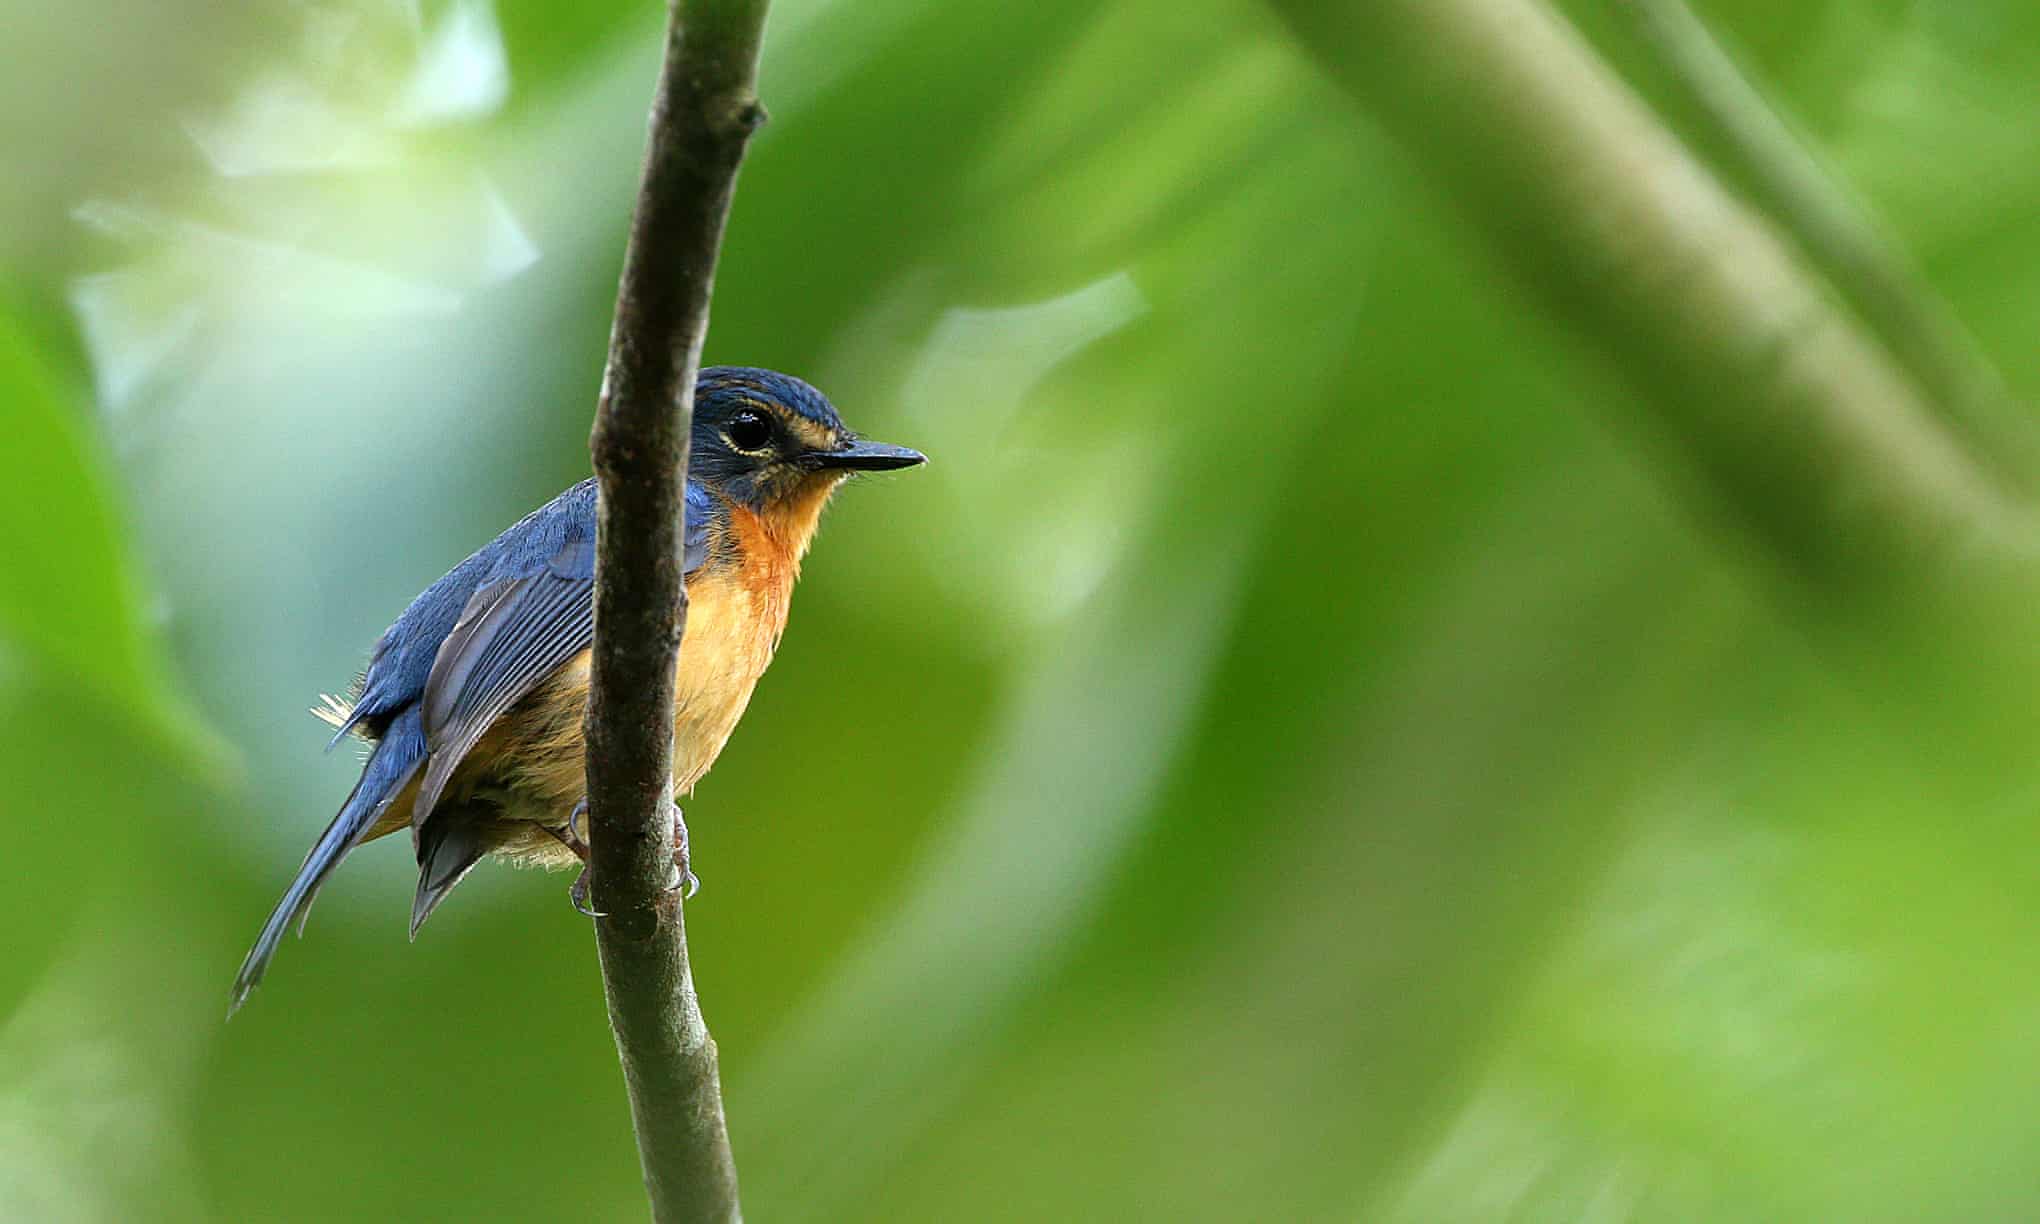 A Togian jungle flycatcher, one of the new sub-species discovered during the six-week expedition.